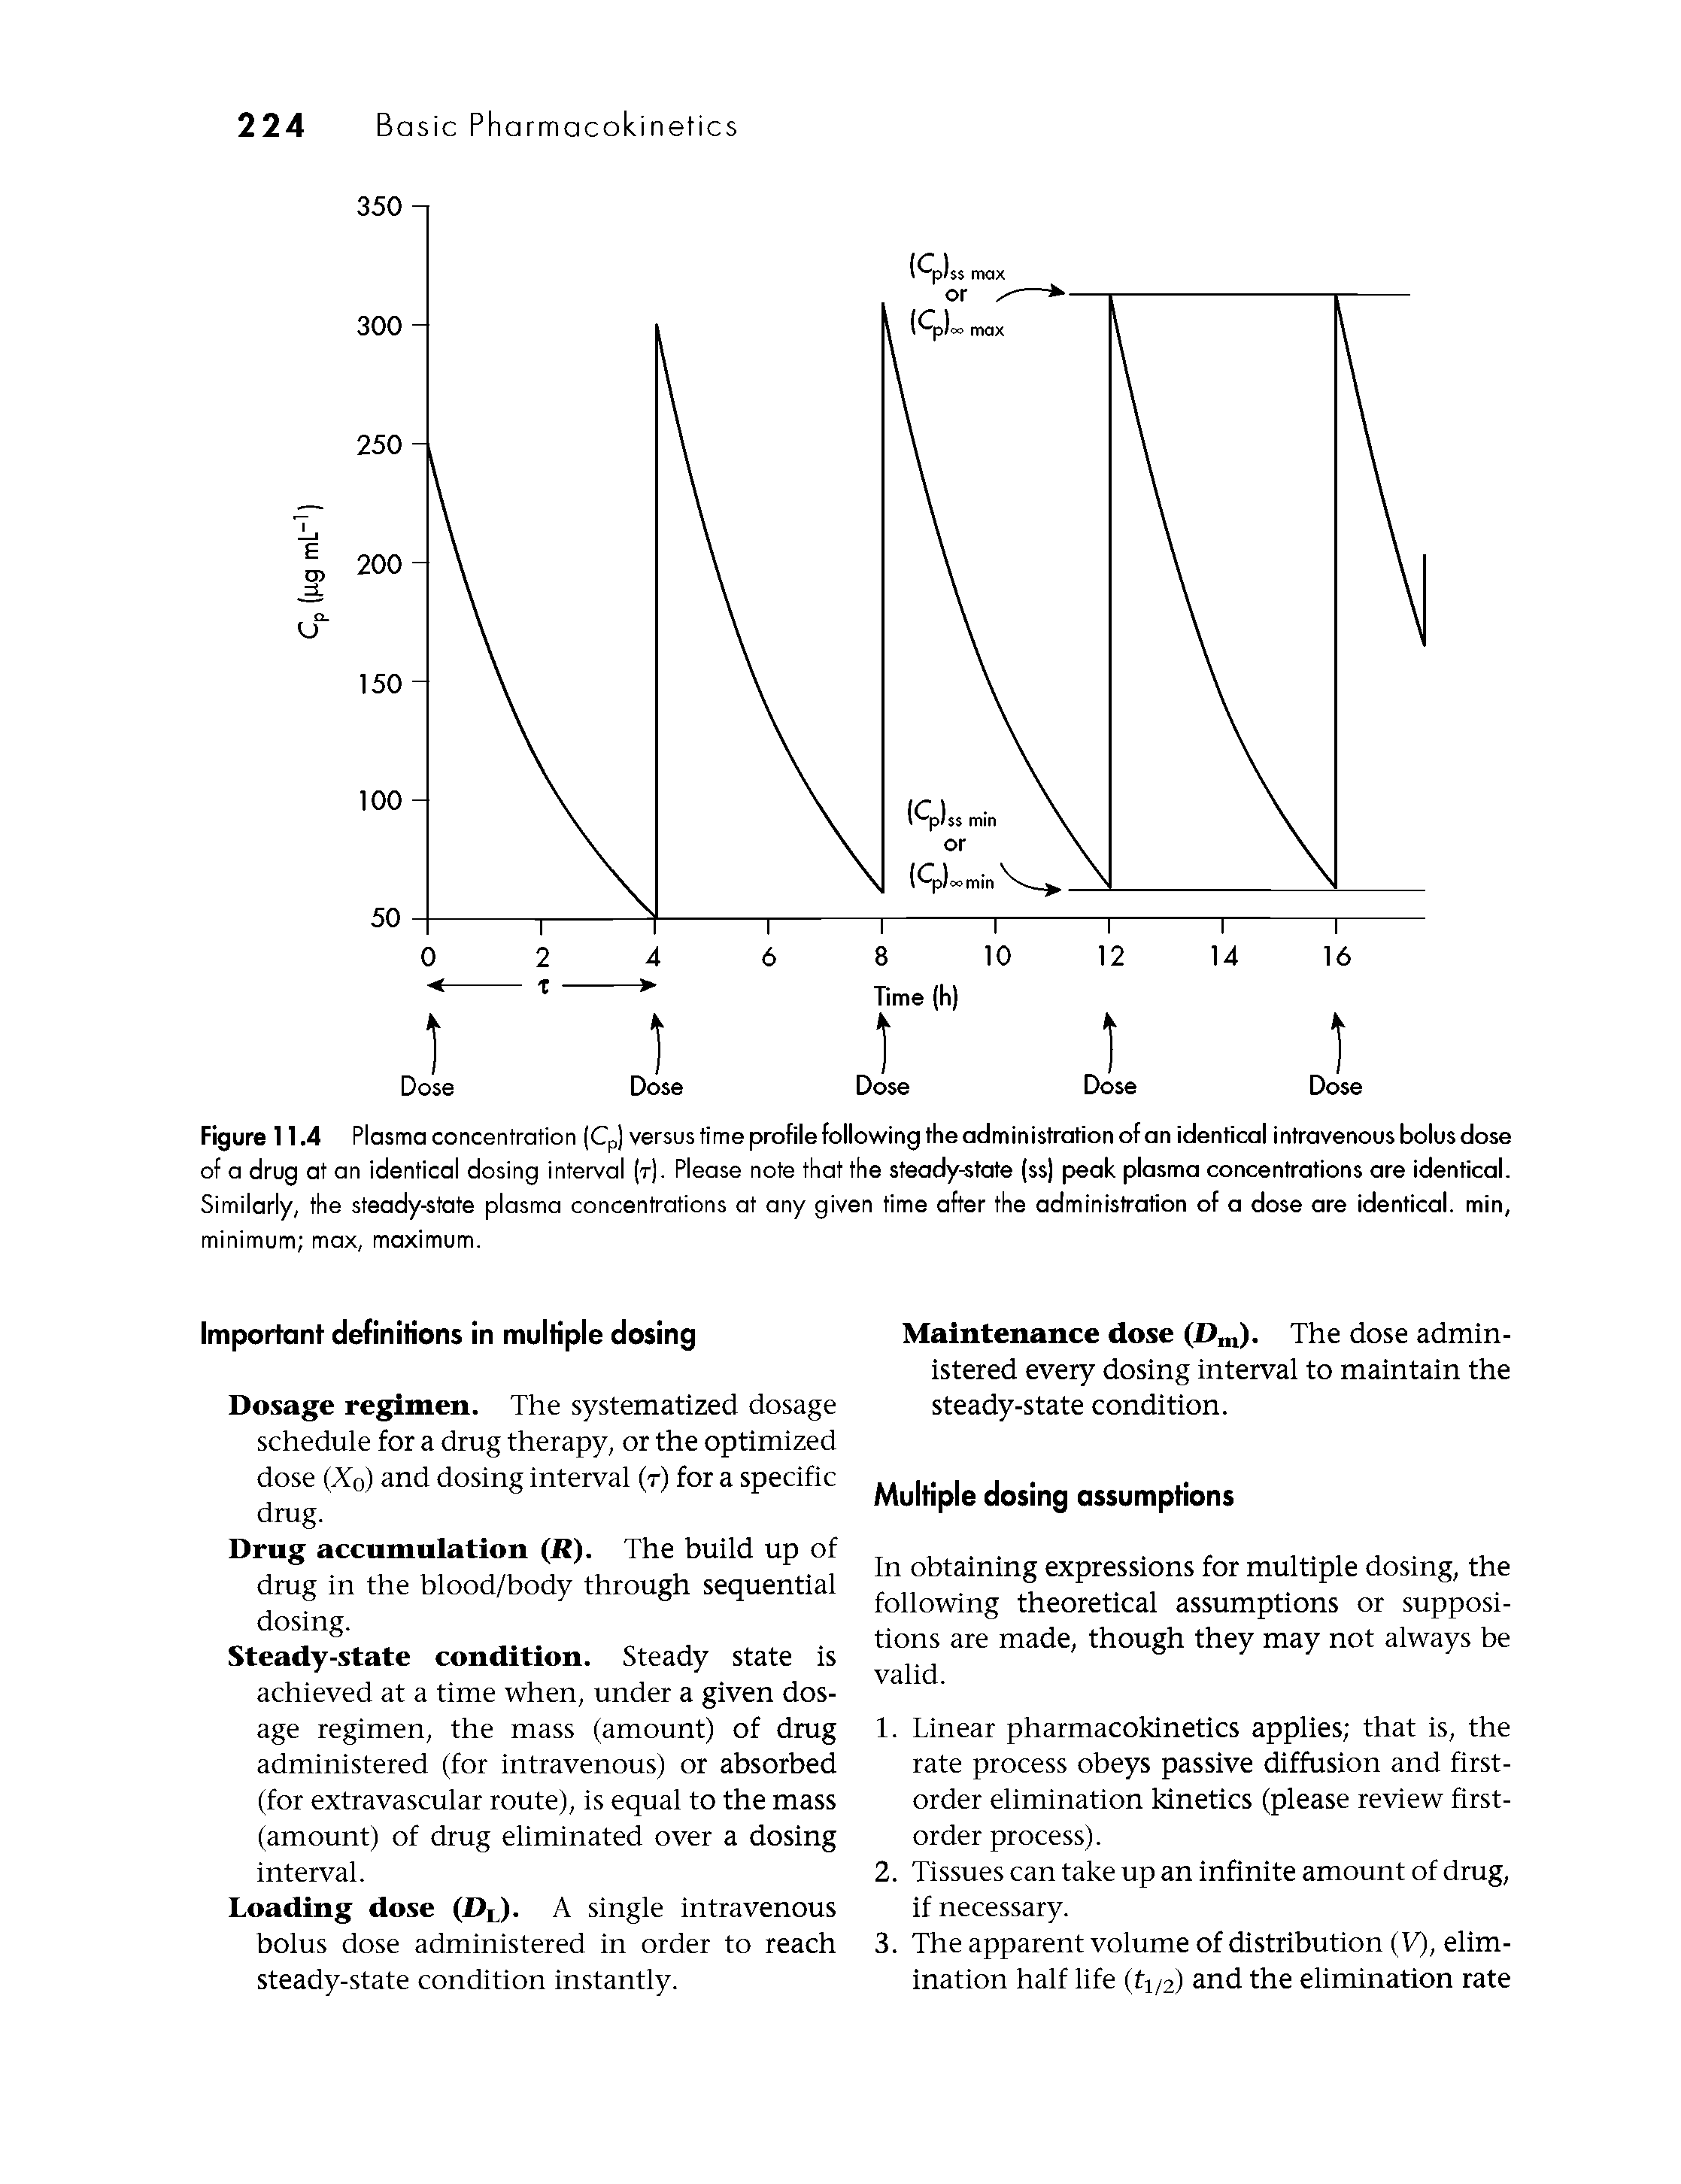 Figure 11.4 Plasma concentration (Cp) versus time profile following the administration of an identical intravenous bolus dose of a drug at an identical dosing interval (t). Please note that the steady-etate (ss) peak plasma concentrations are identical. Similarly, the steady-state plasma concentrations at any given time after the administration of a dose are identical, min, minimum max, maximum.